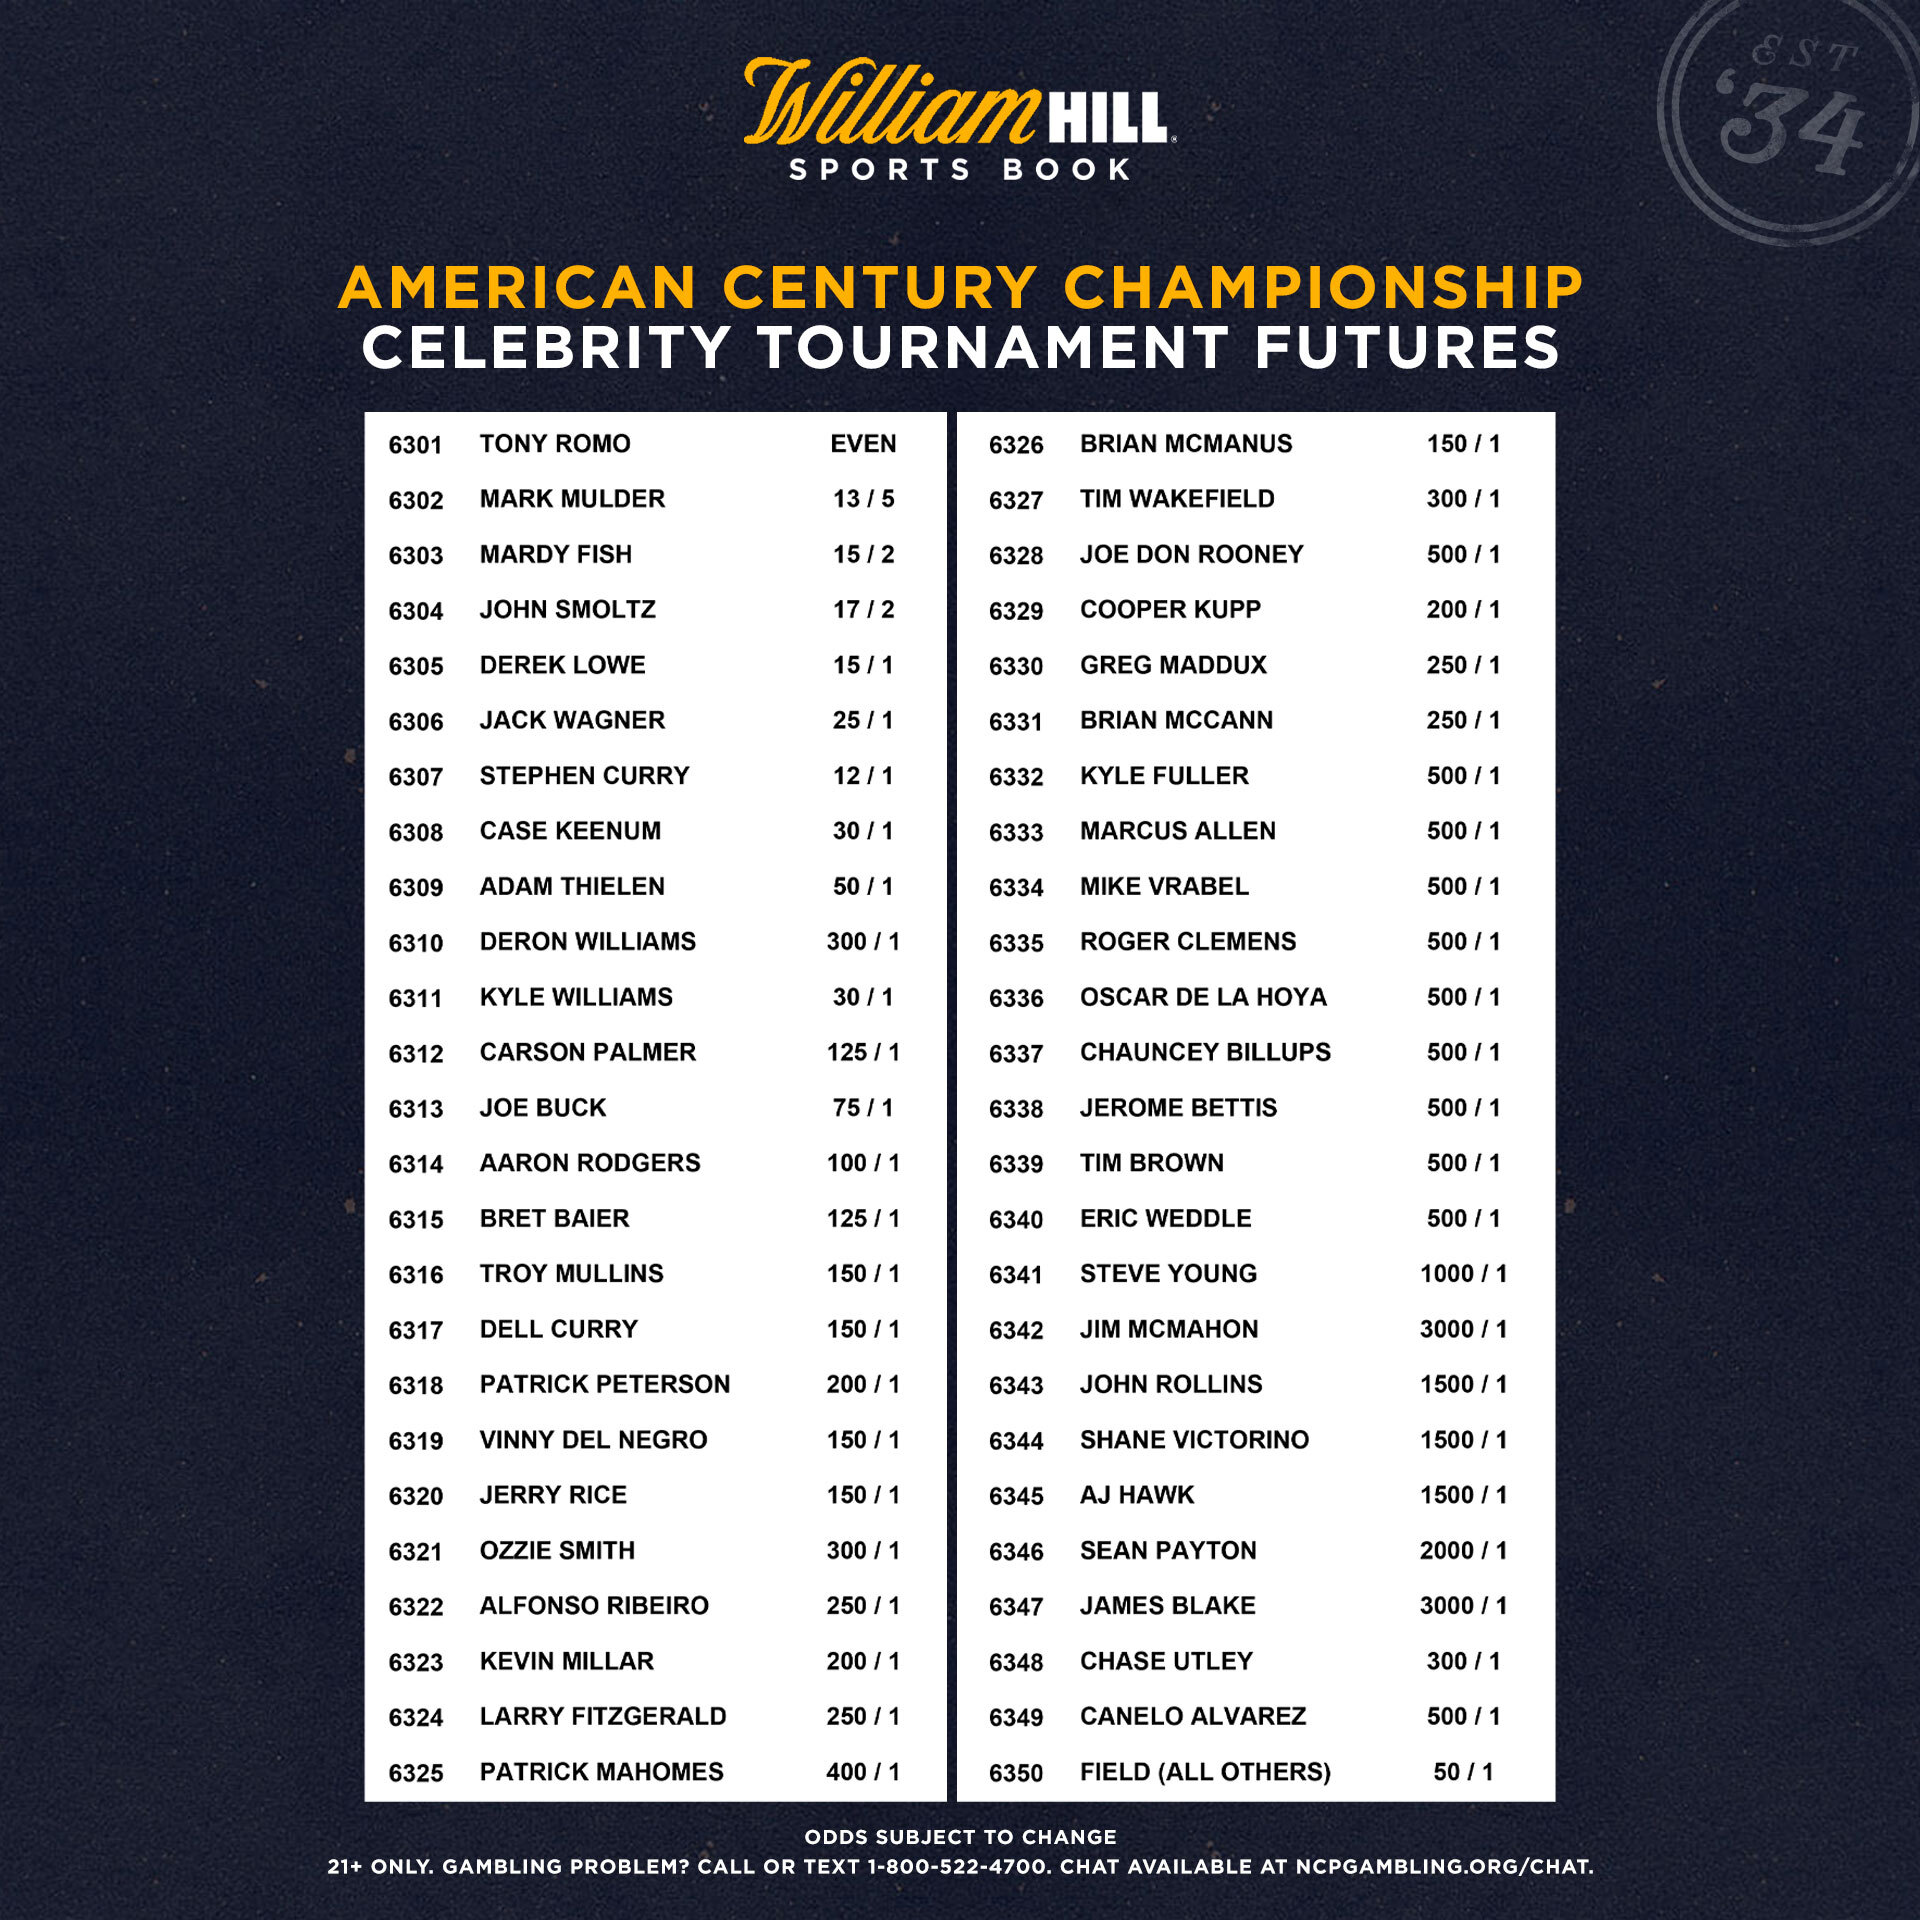 2020 American Century Championship Odds for Celebrity Tournament